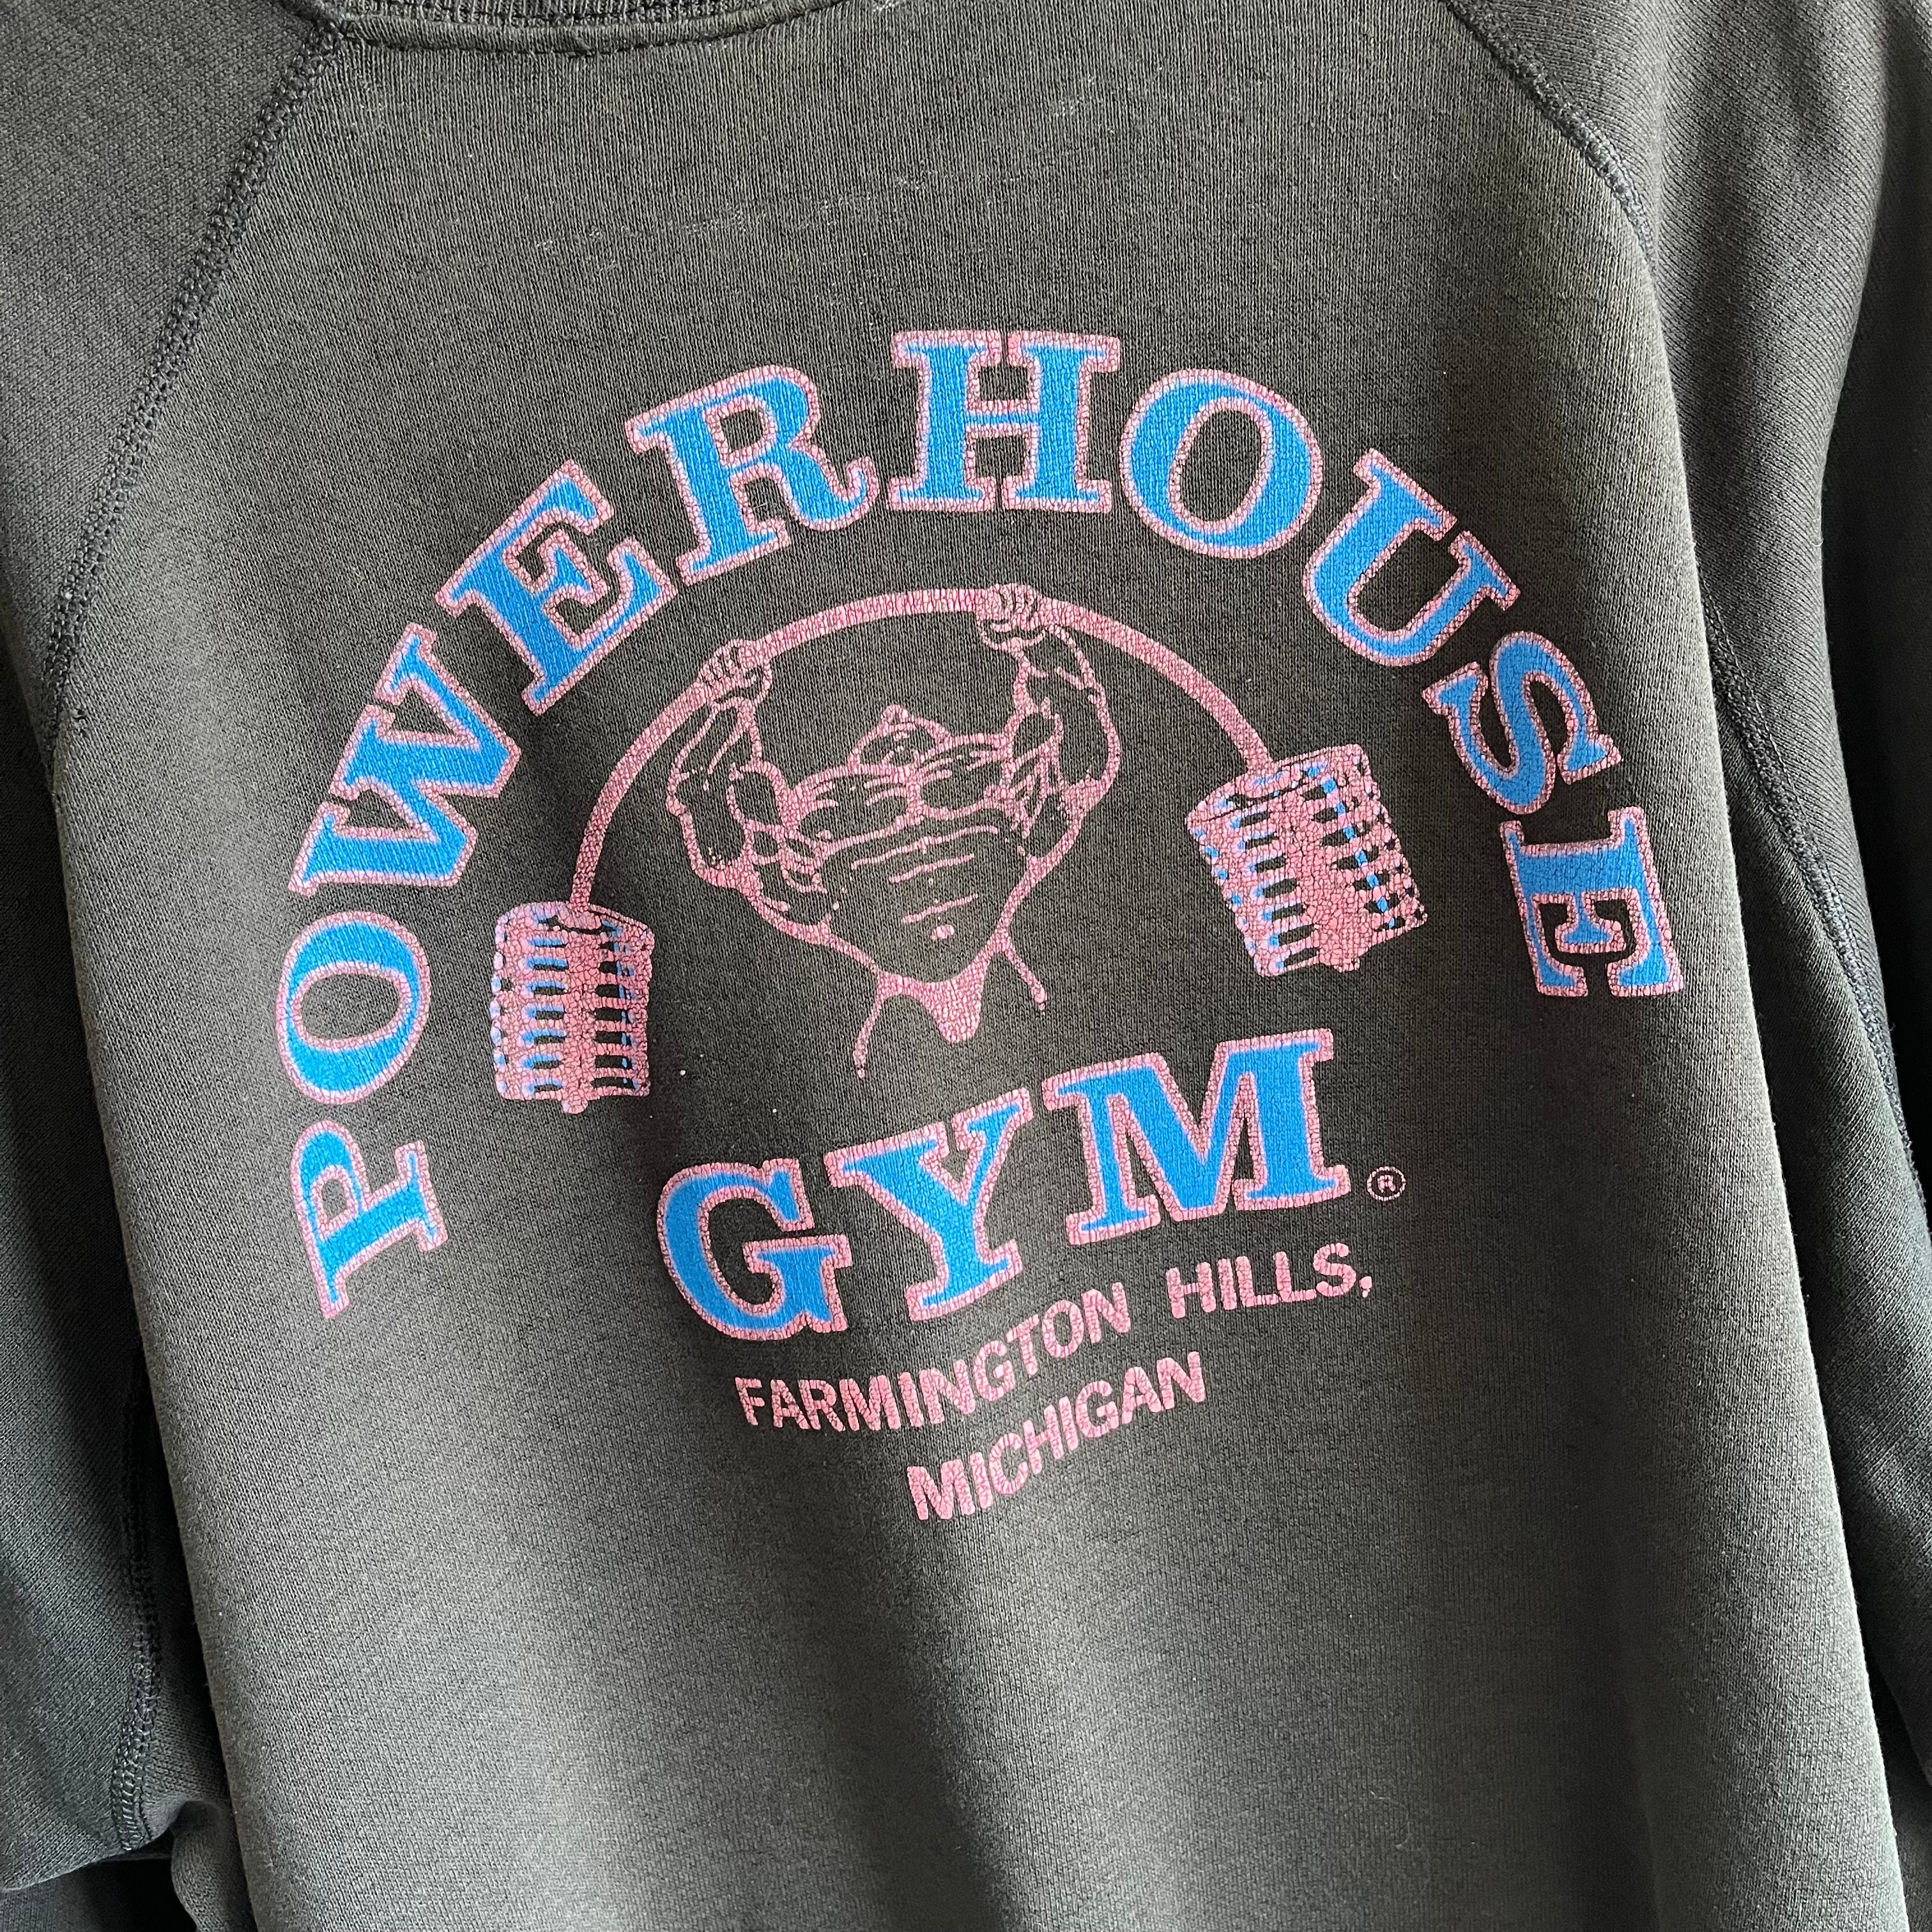 1980s Thinned Out Farmington Hills, Michigan Powerhouse Gym - Front and Back